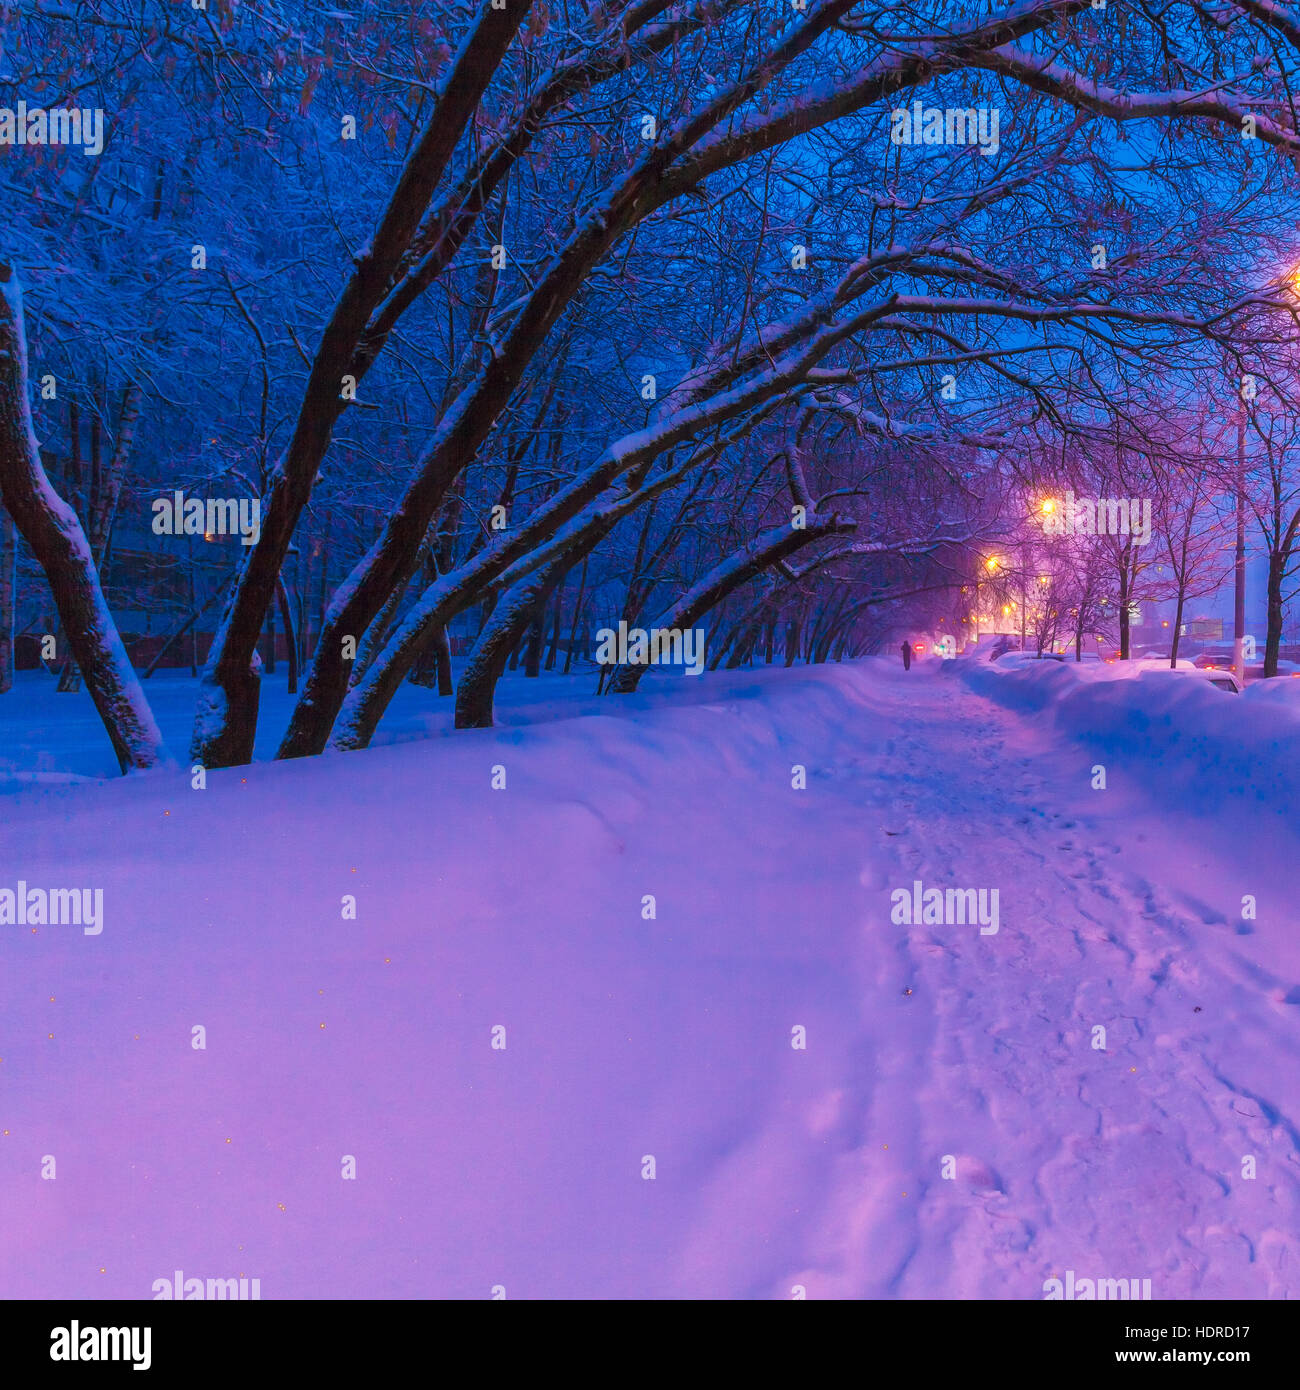 Night view of the winter city with snow-covered trees and lanterns Stock Photo